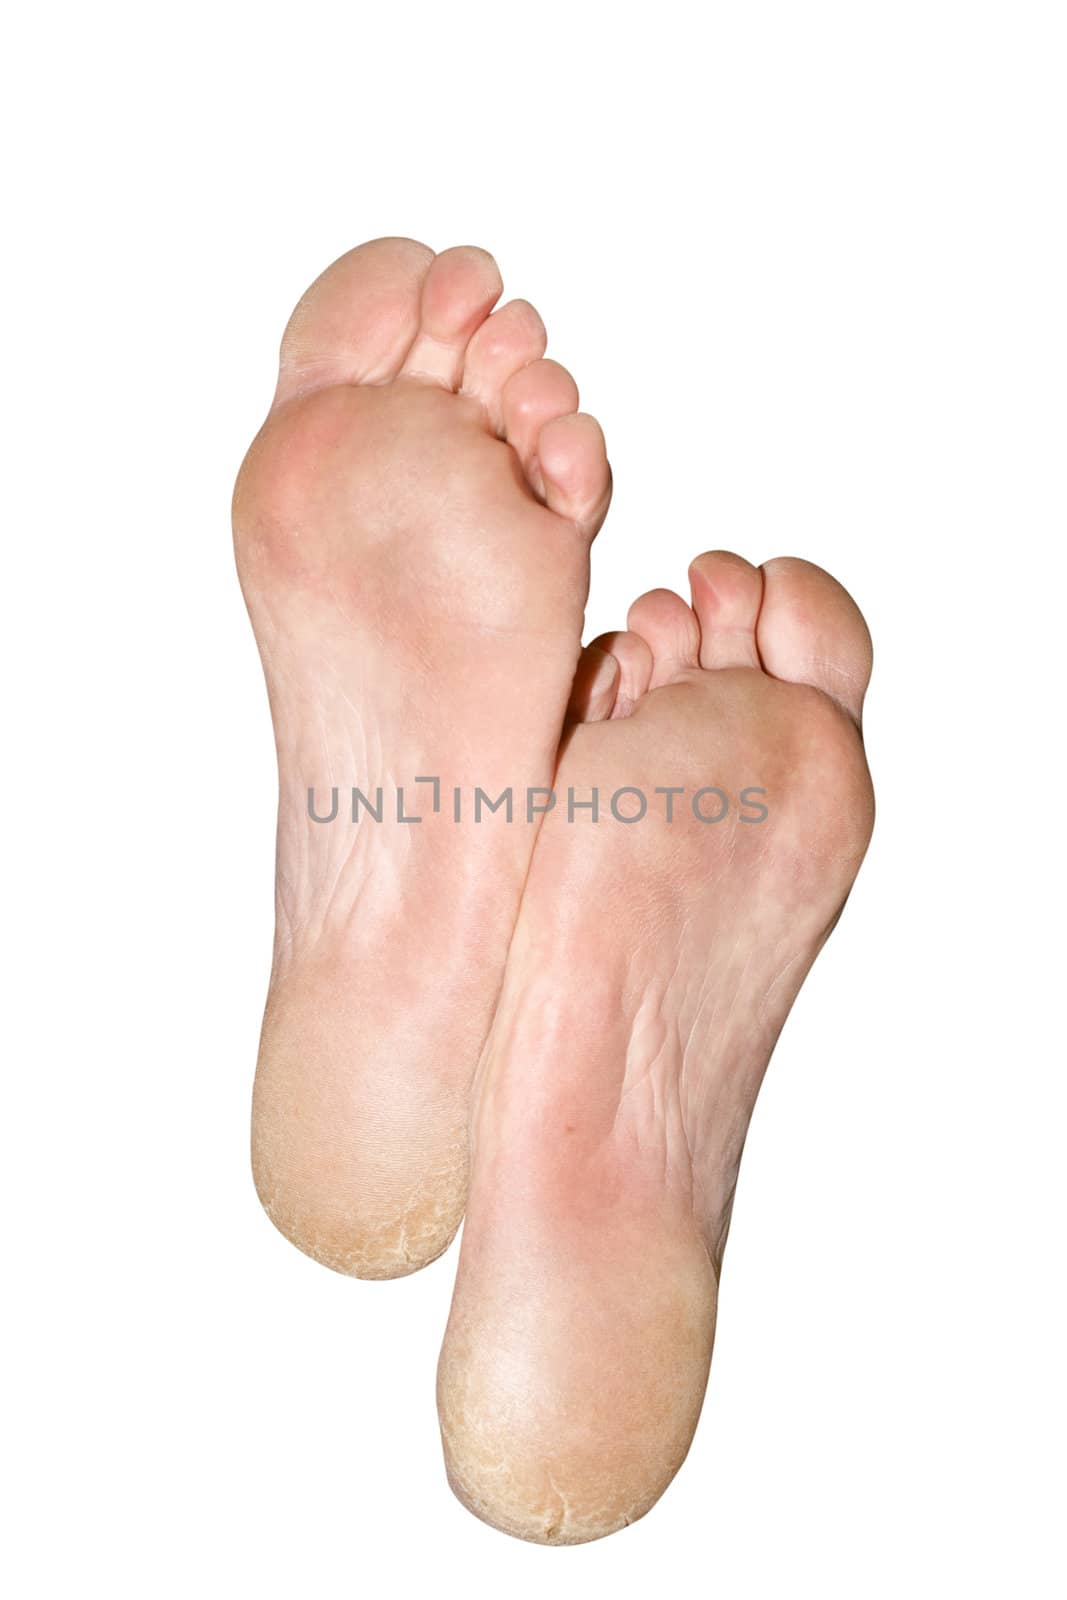 The large feet. Caucasian feet. Isolated over white background